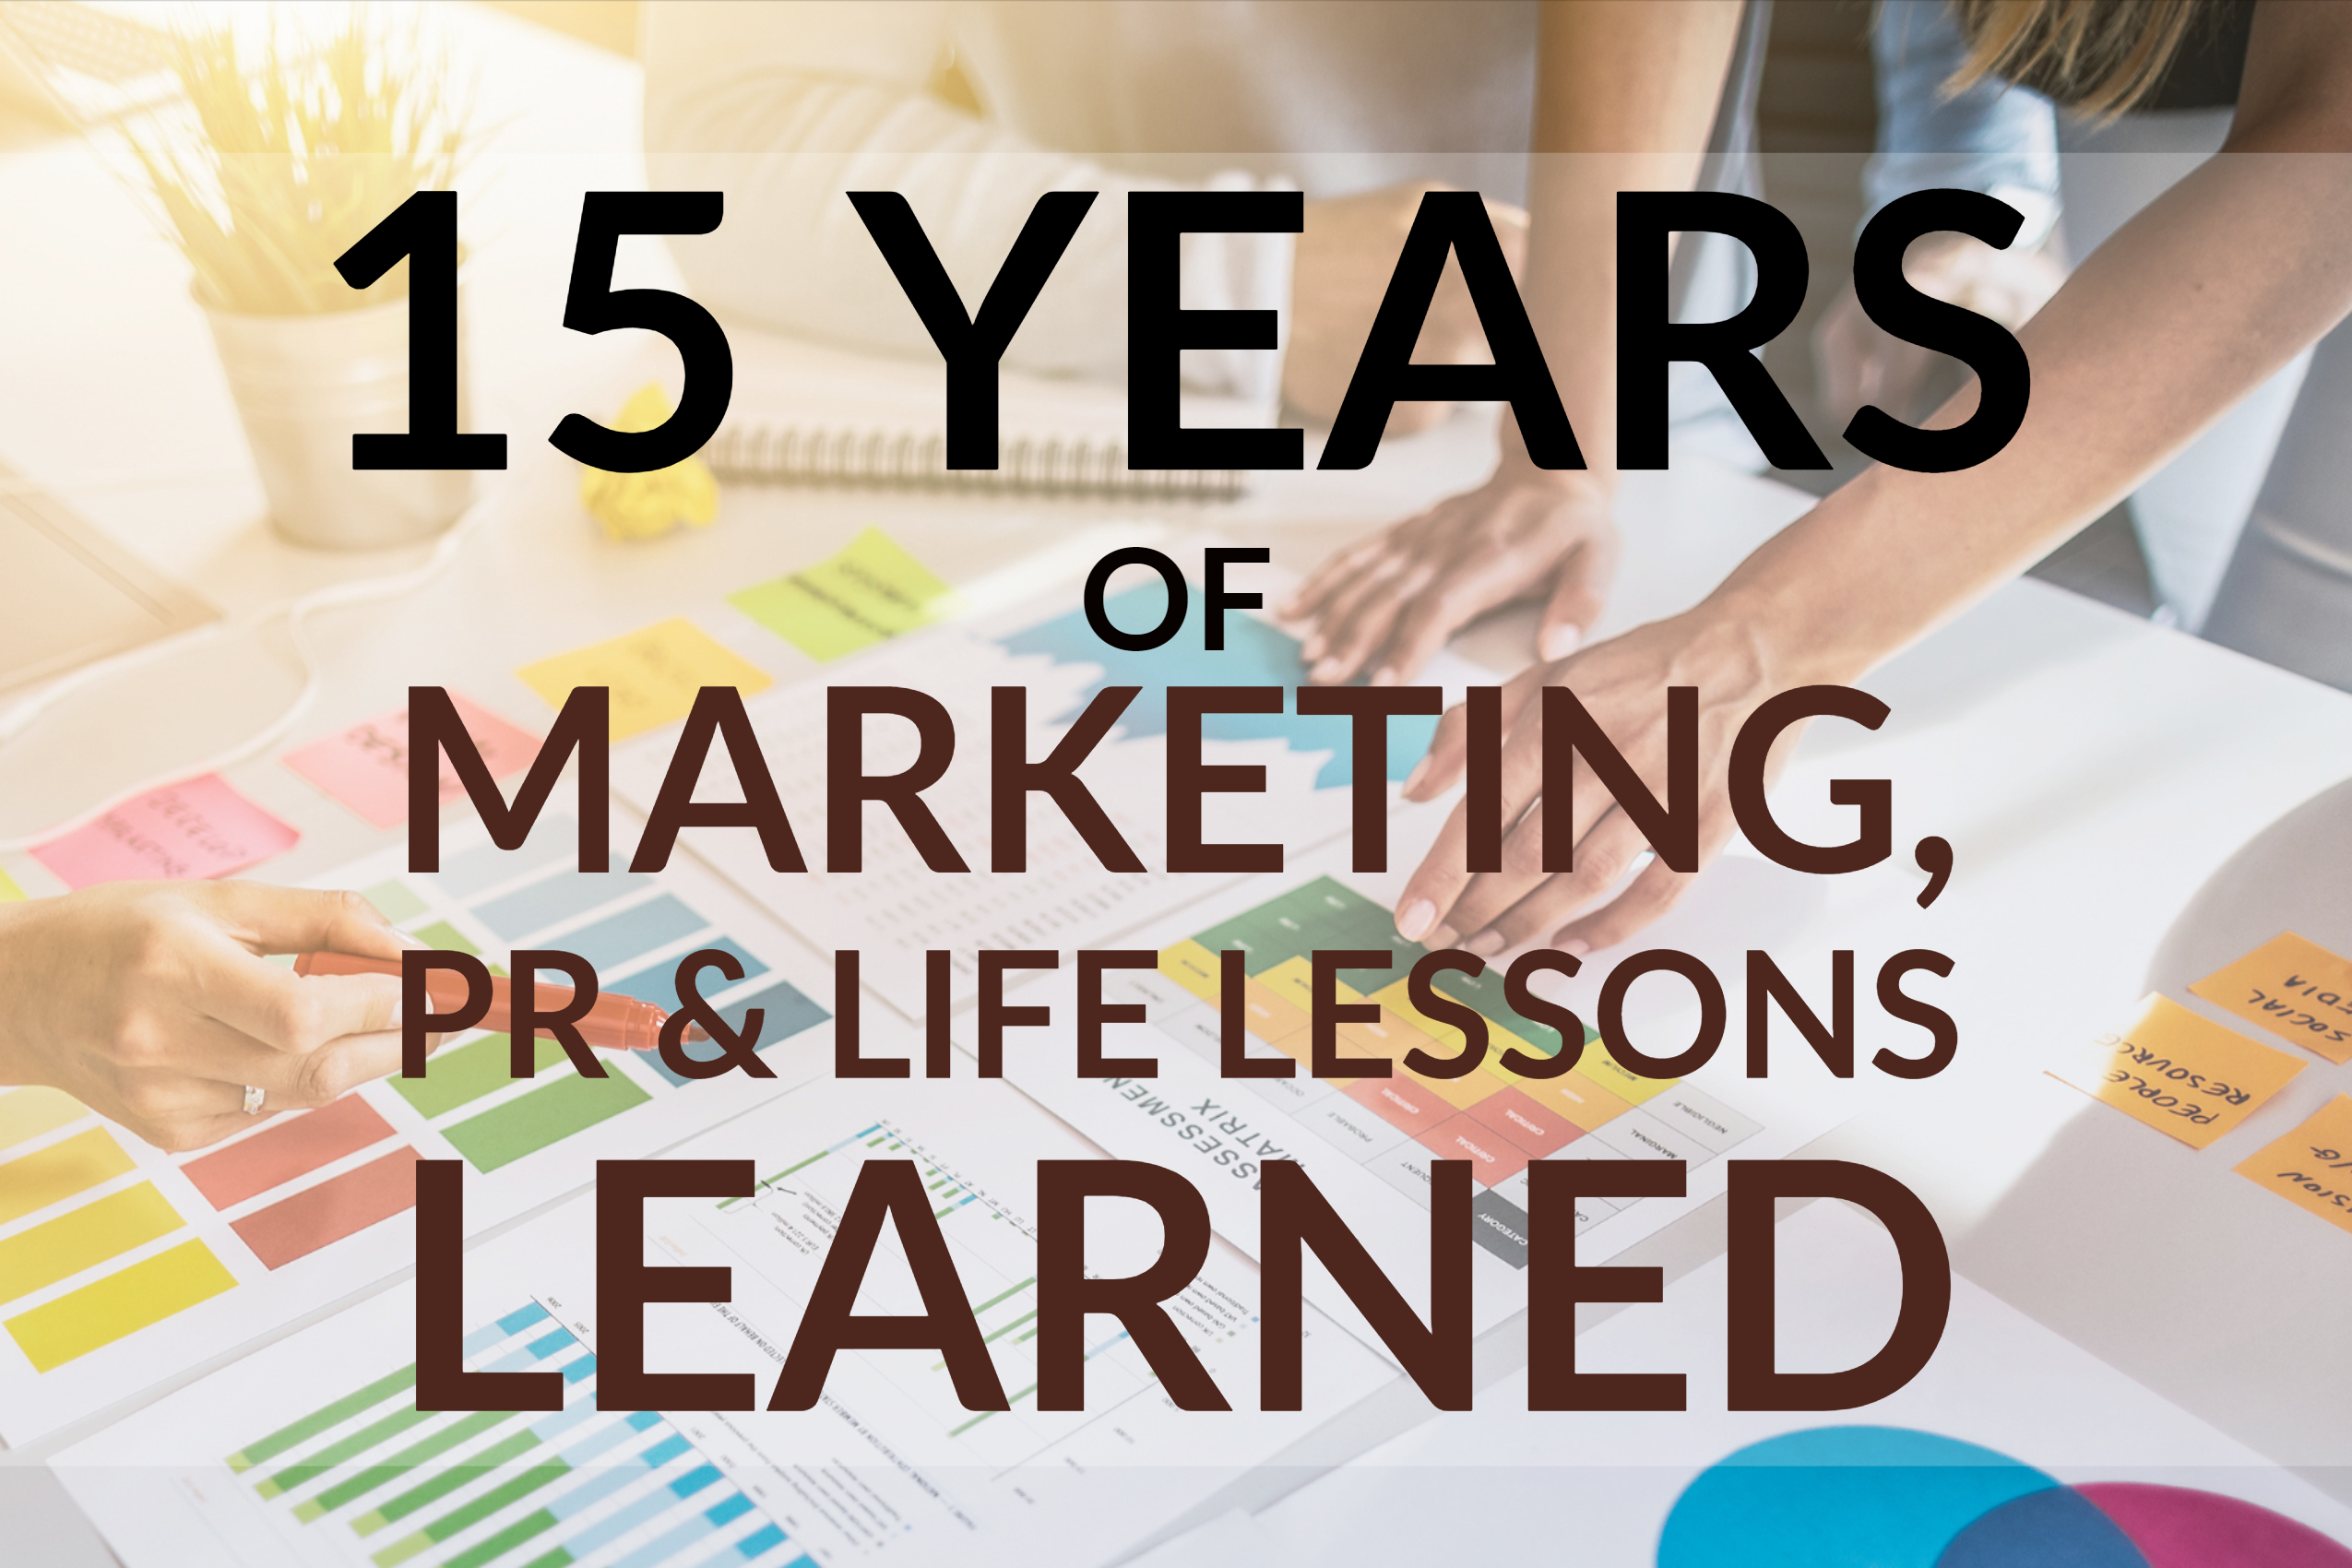 15 Years Of Marketing, PR & Life Lessons Learned